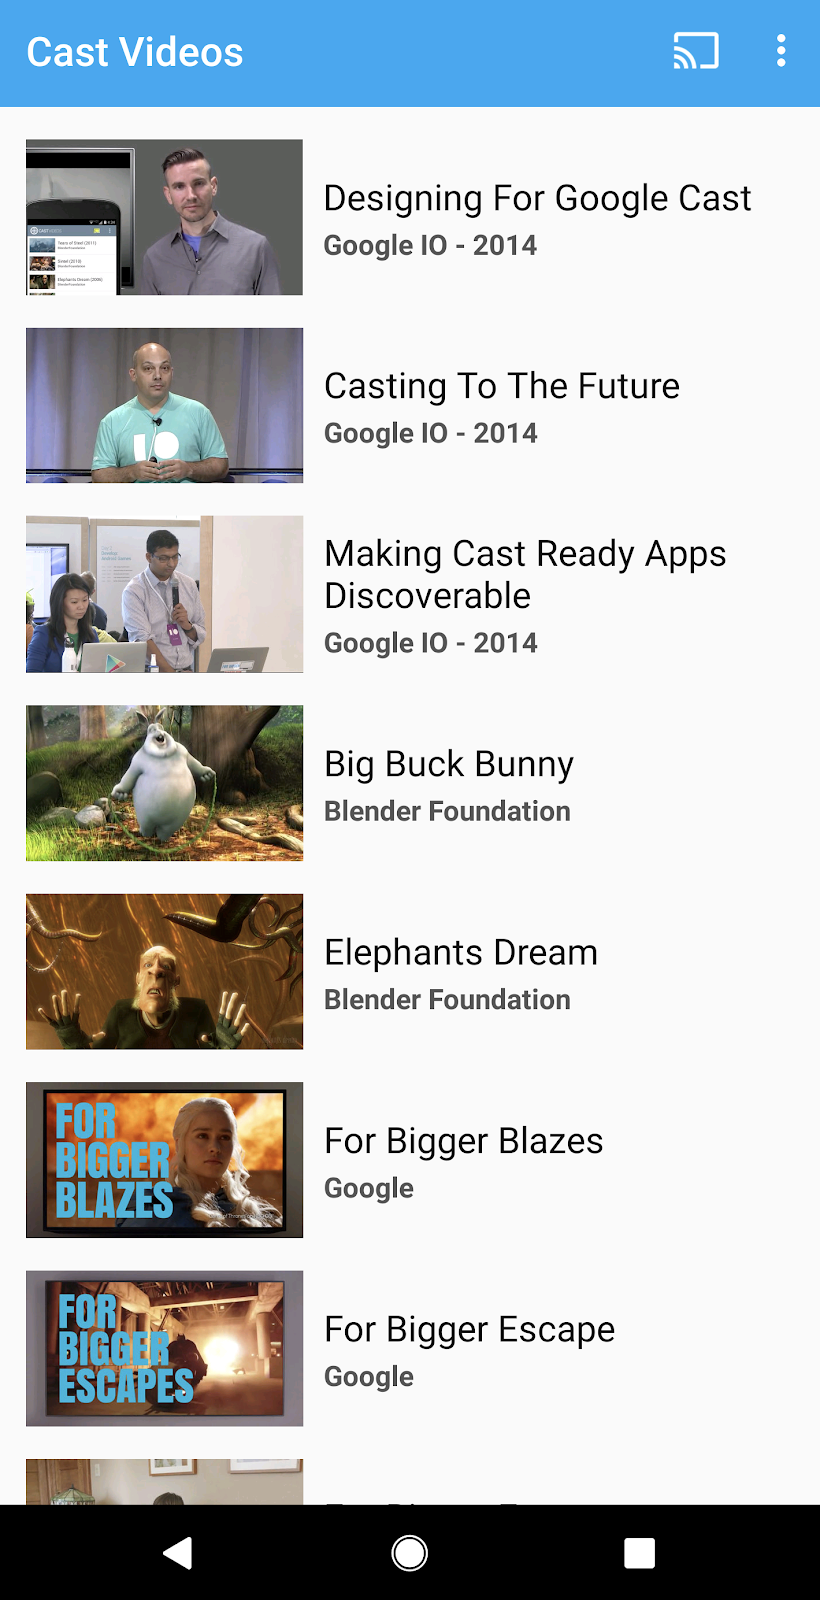 Image of the Cast Videos sender app running on an Android phone screen